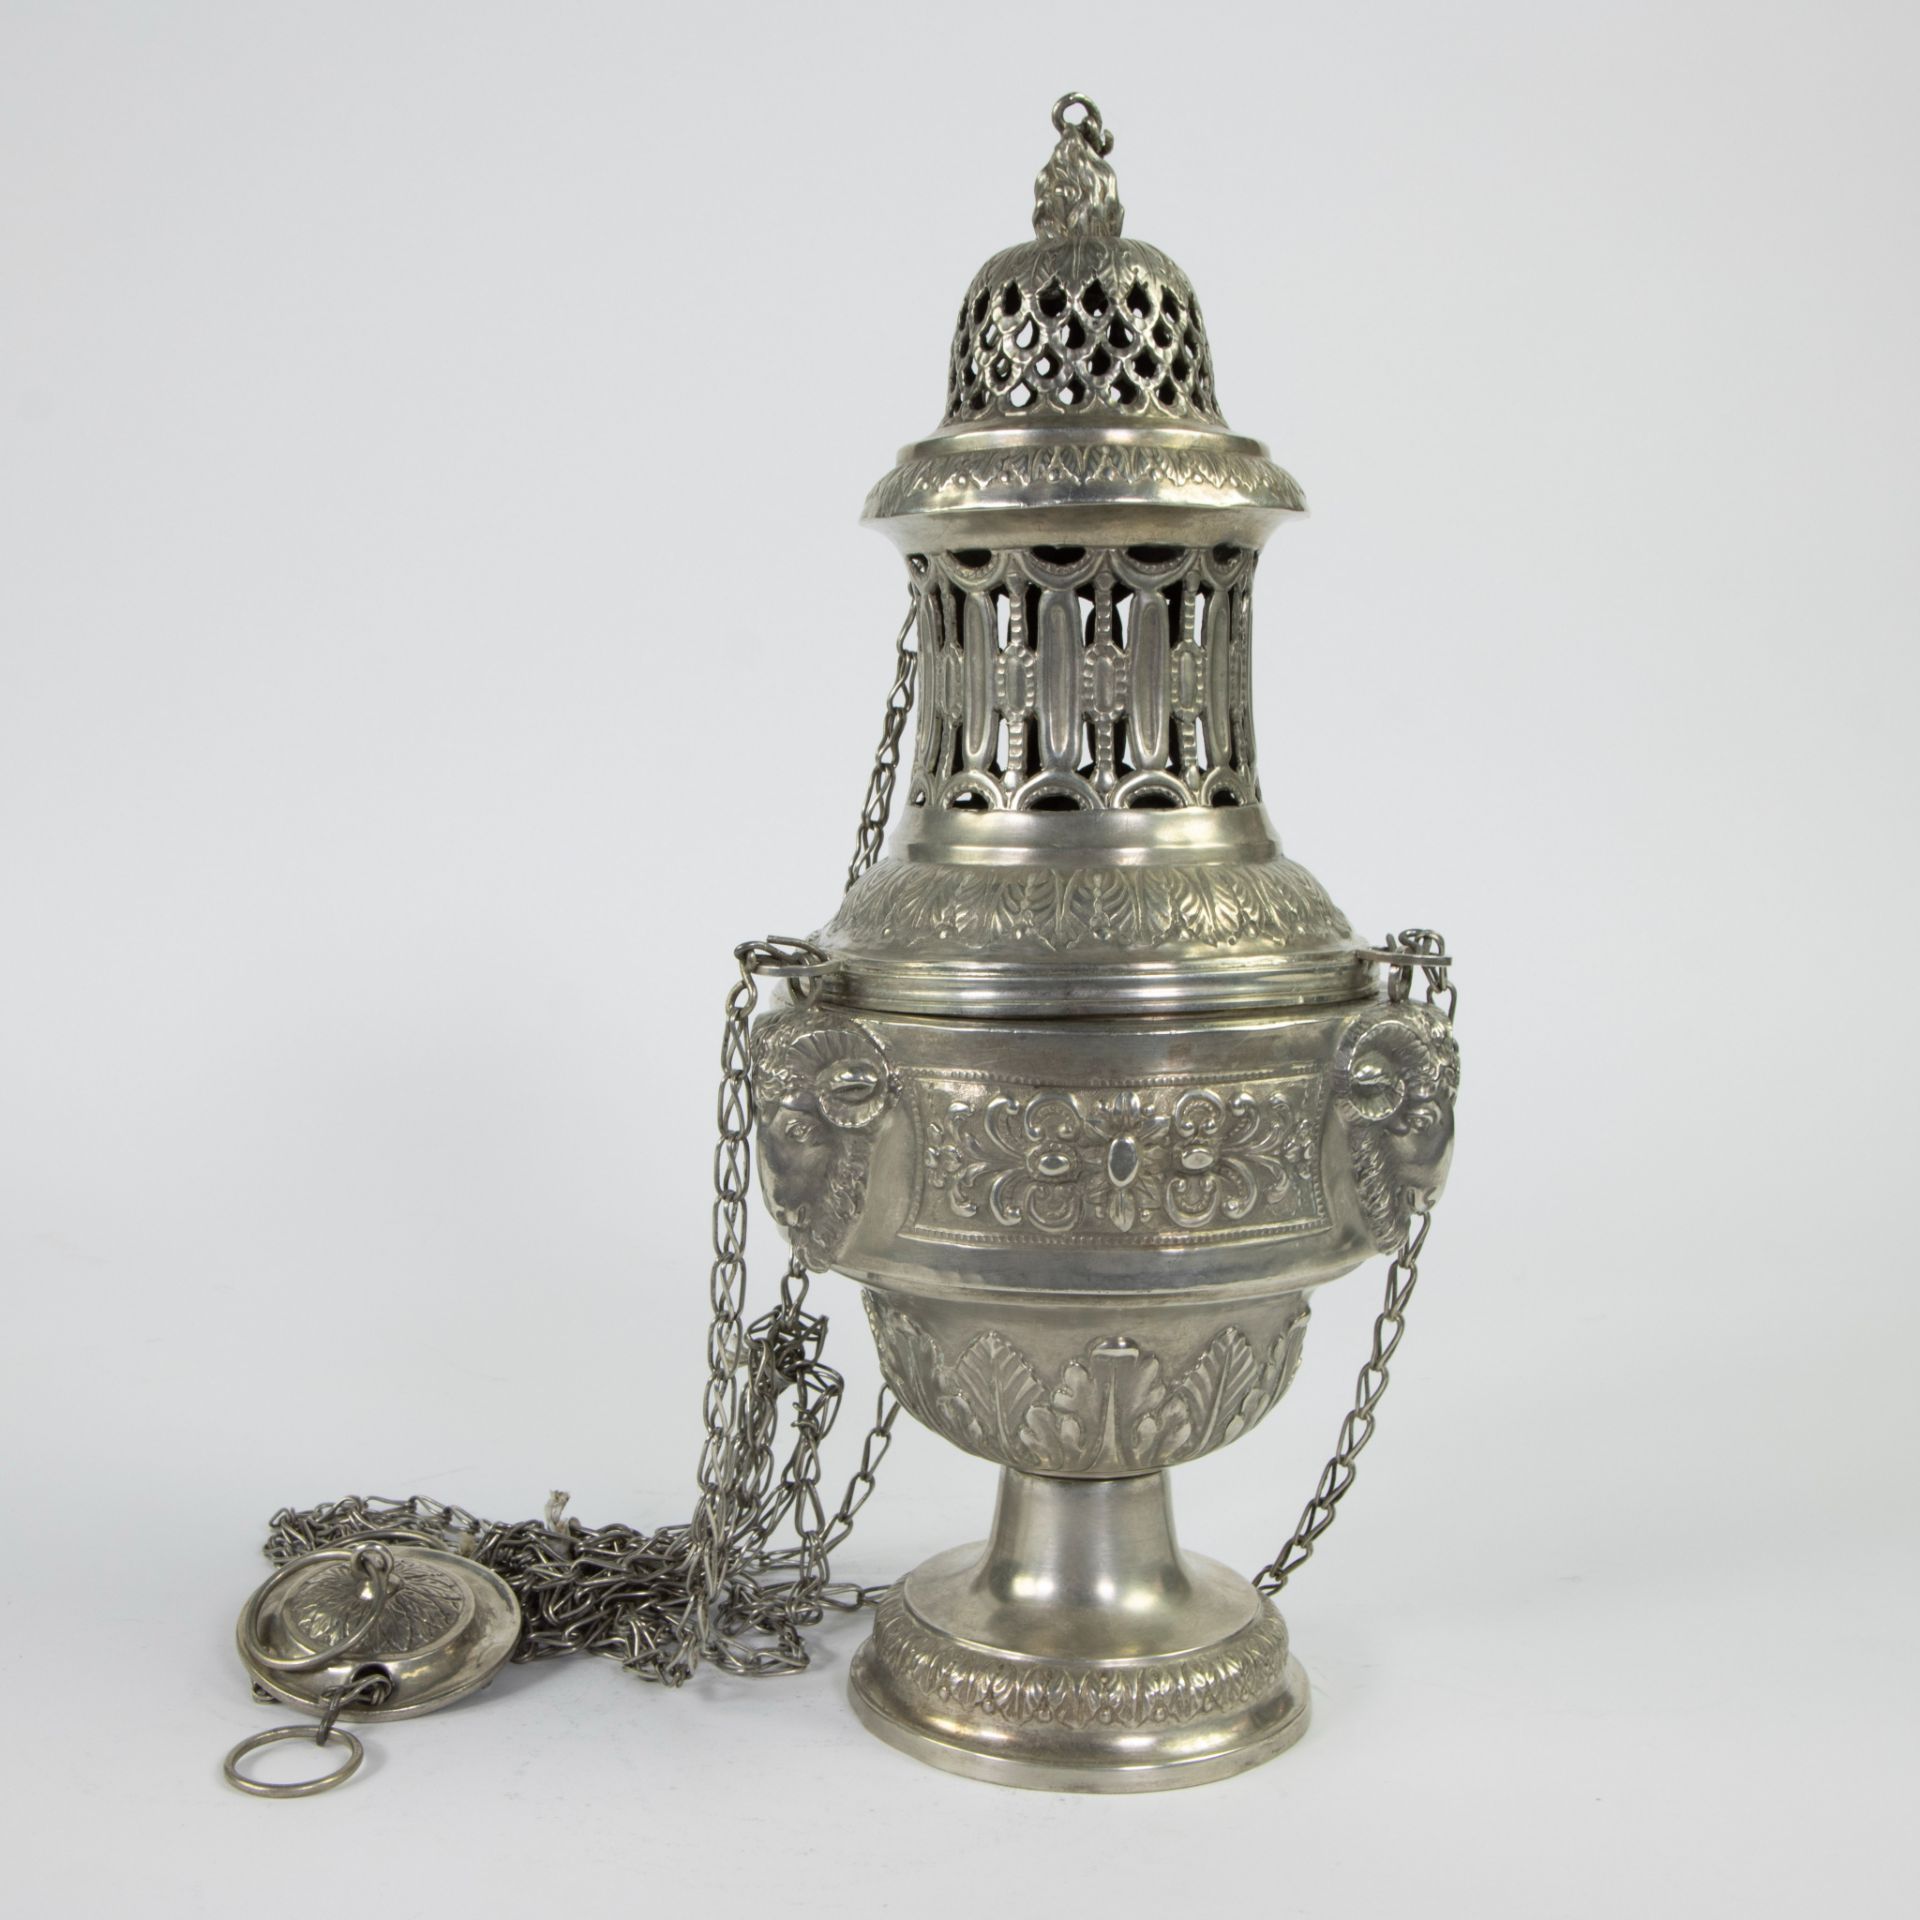 Silver incense burner late 18th, style Louis XVI, marked